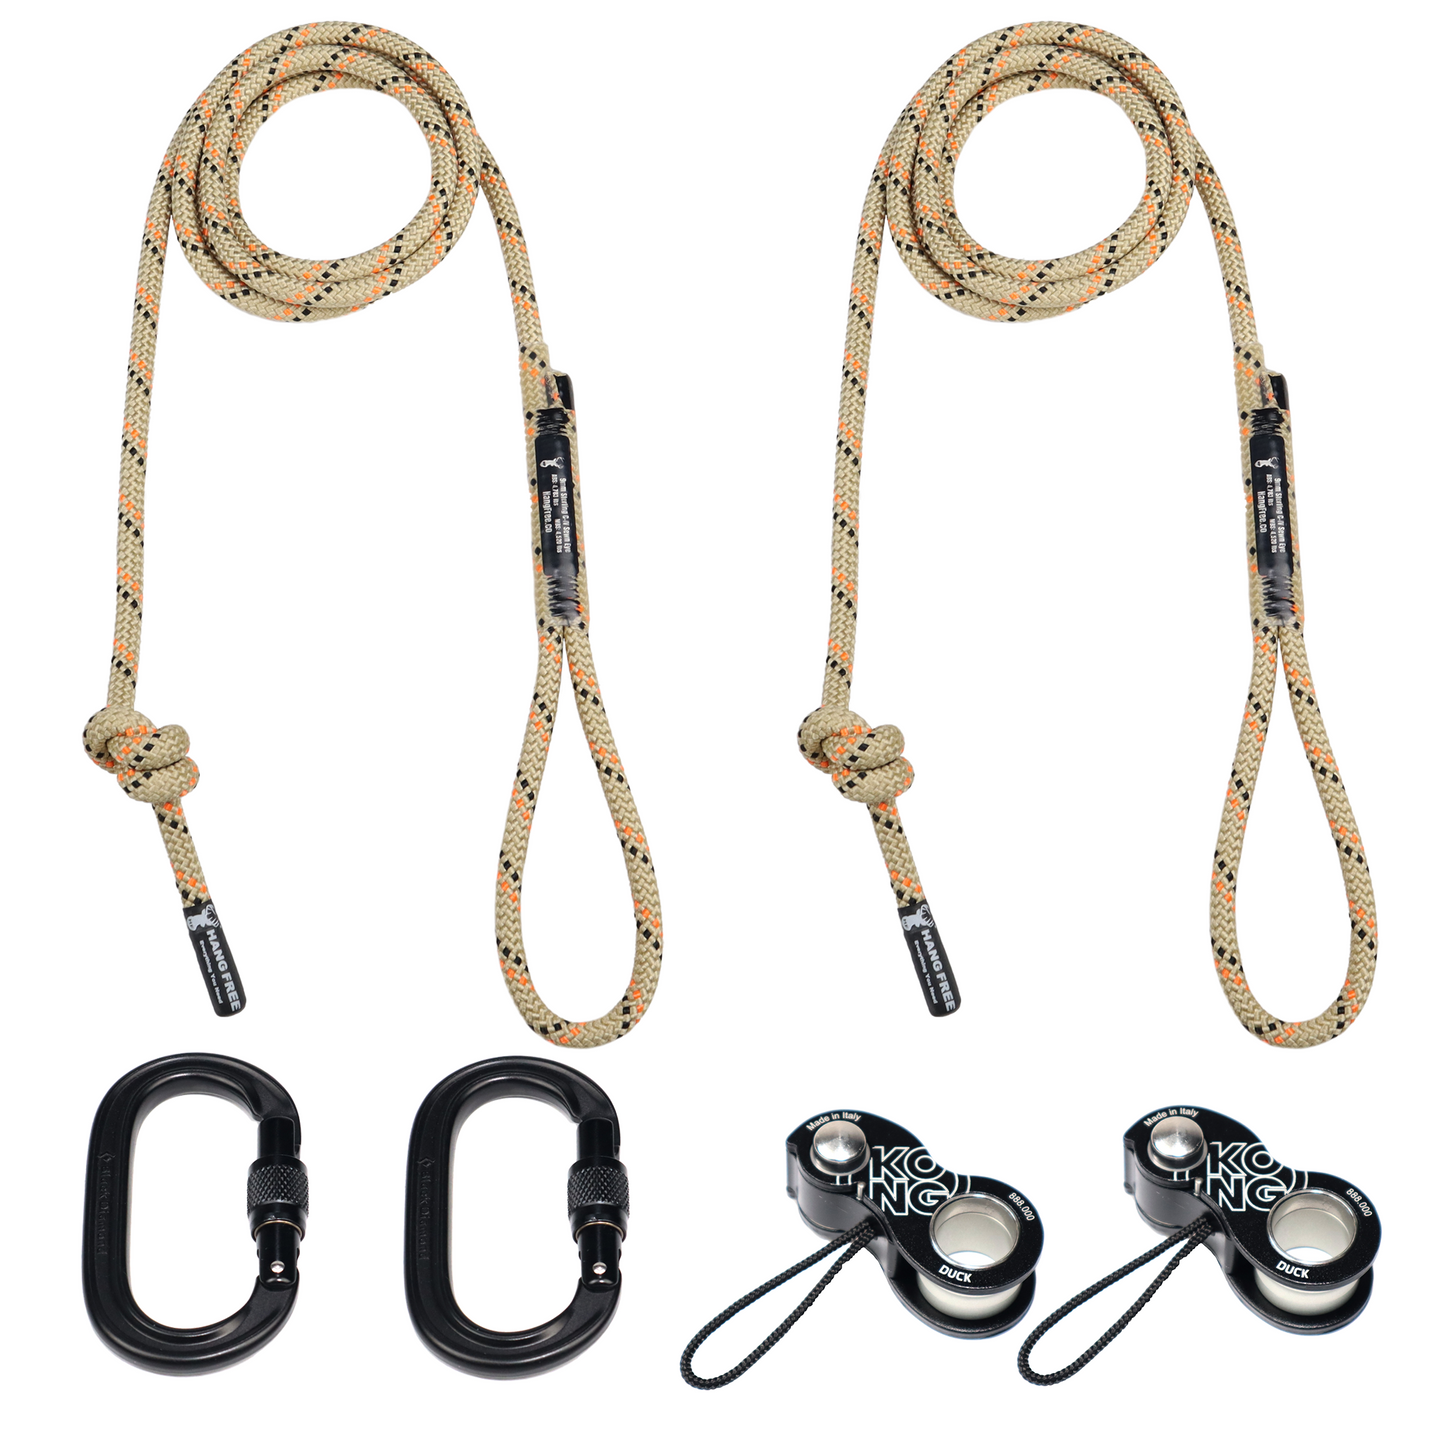 9mm Orange C-IV Deluxe Sewn Tether & Lineman's Package with Carabiners